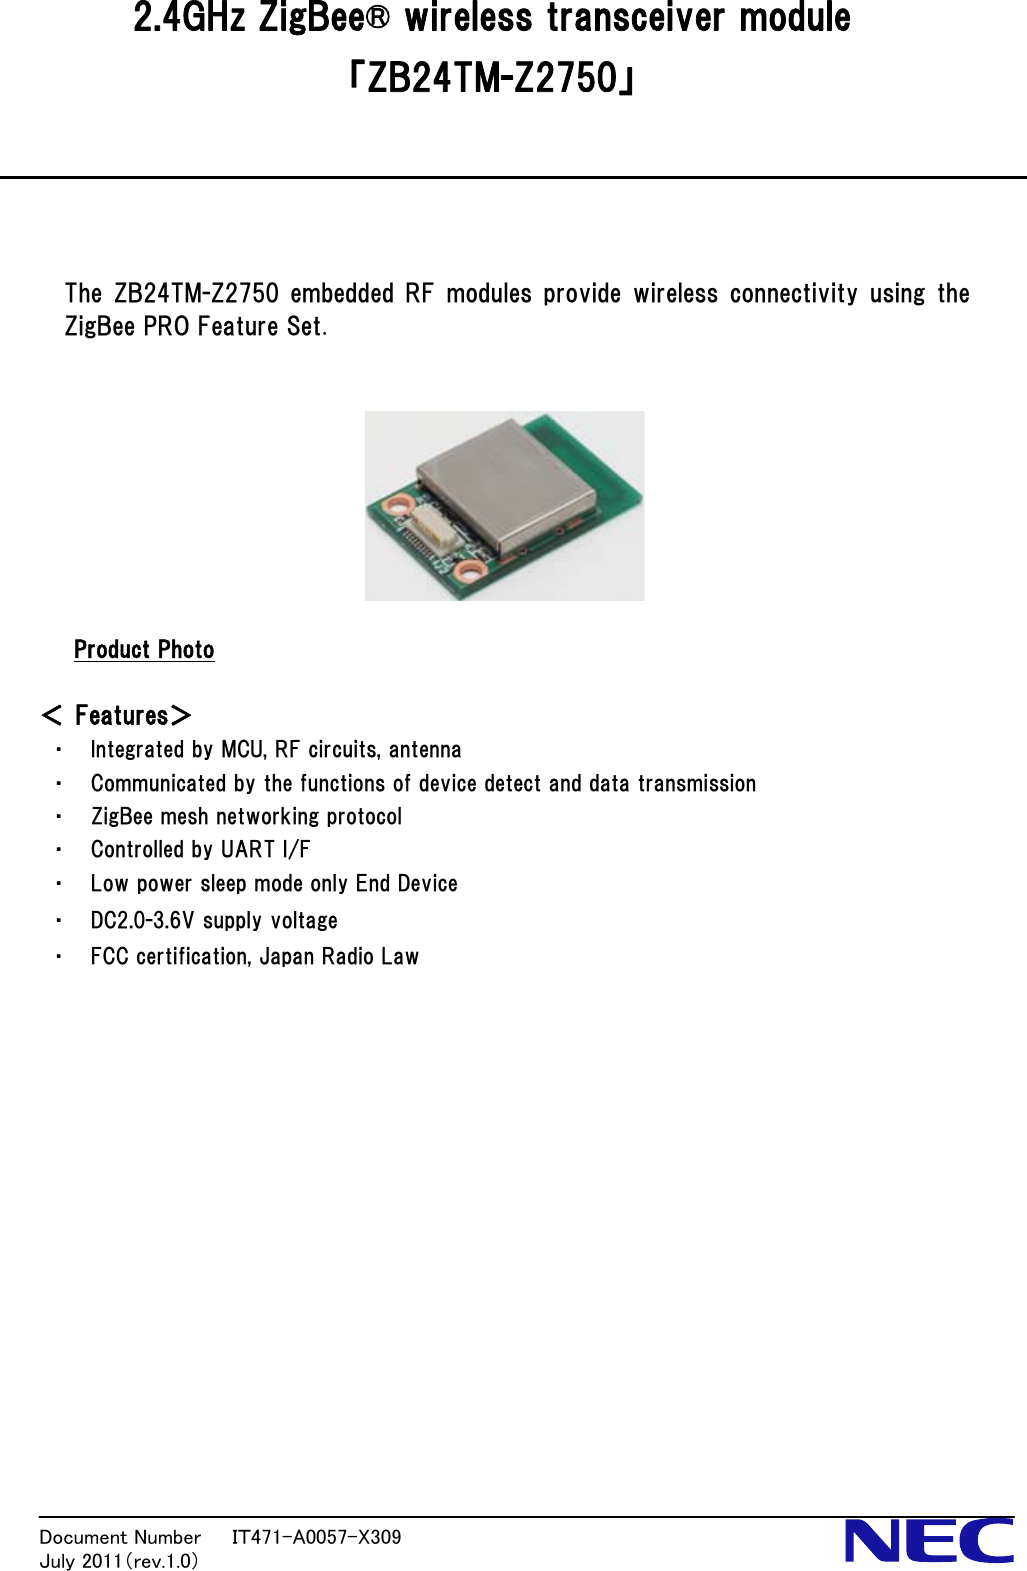  2.4GHz ZigBee® wireless transceiver module 「ZB24TM-Z2750」     The ZB24TM-Z2750 embedded RF modules provide wireless connectivity using the ZigBee PRO Feature Set.       Product Photo  ＜ Features＞ ・ Integrated by MCU, RF circuits, antenna ・ Communicated by the functions of device detect and data transmission ・ ZigBee mesh networking protocol ・ Controlled by UART I/F ・ Low power sleep mode only End Device ・ DC2.0-3.6V supply voltage ・ FCC certification, Japan Radio Law               Document Number   ＩＴ471-A0057-X309           July 2011（rev.1.0） 